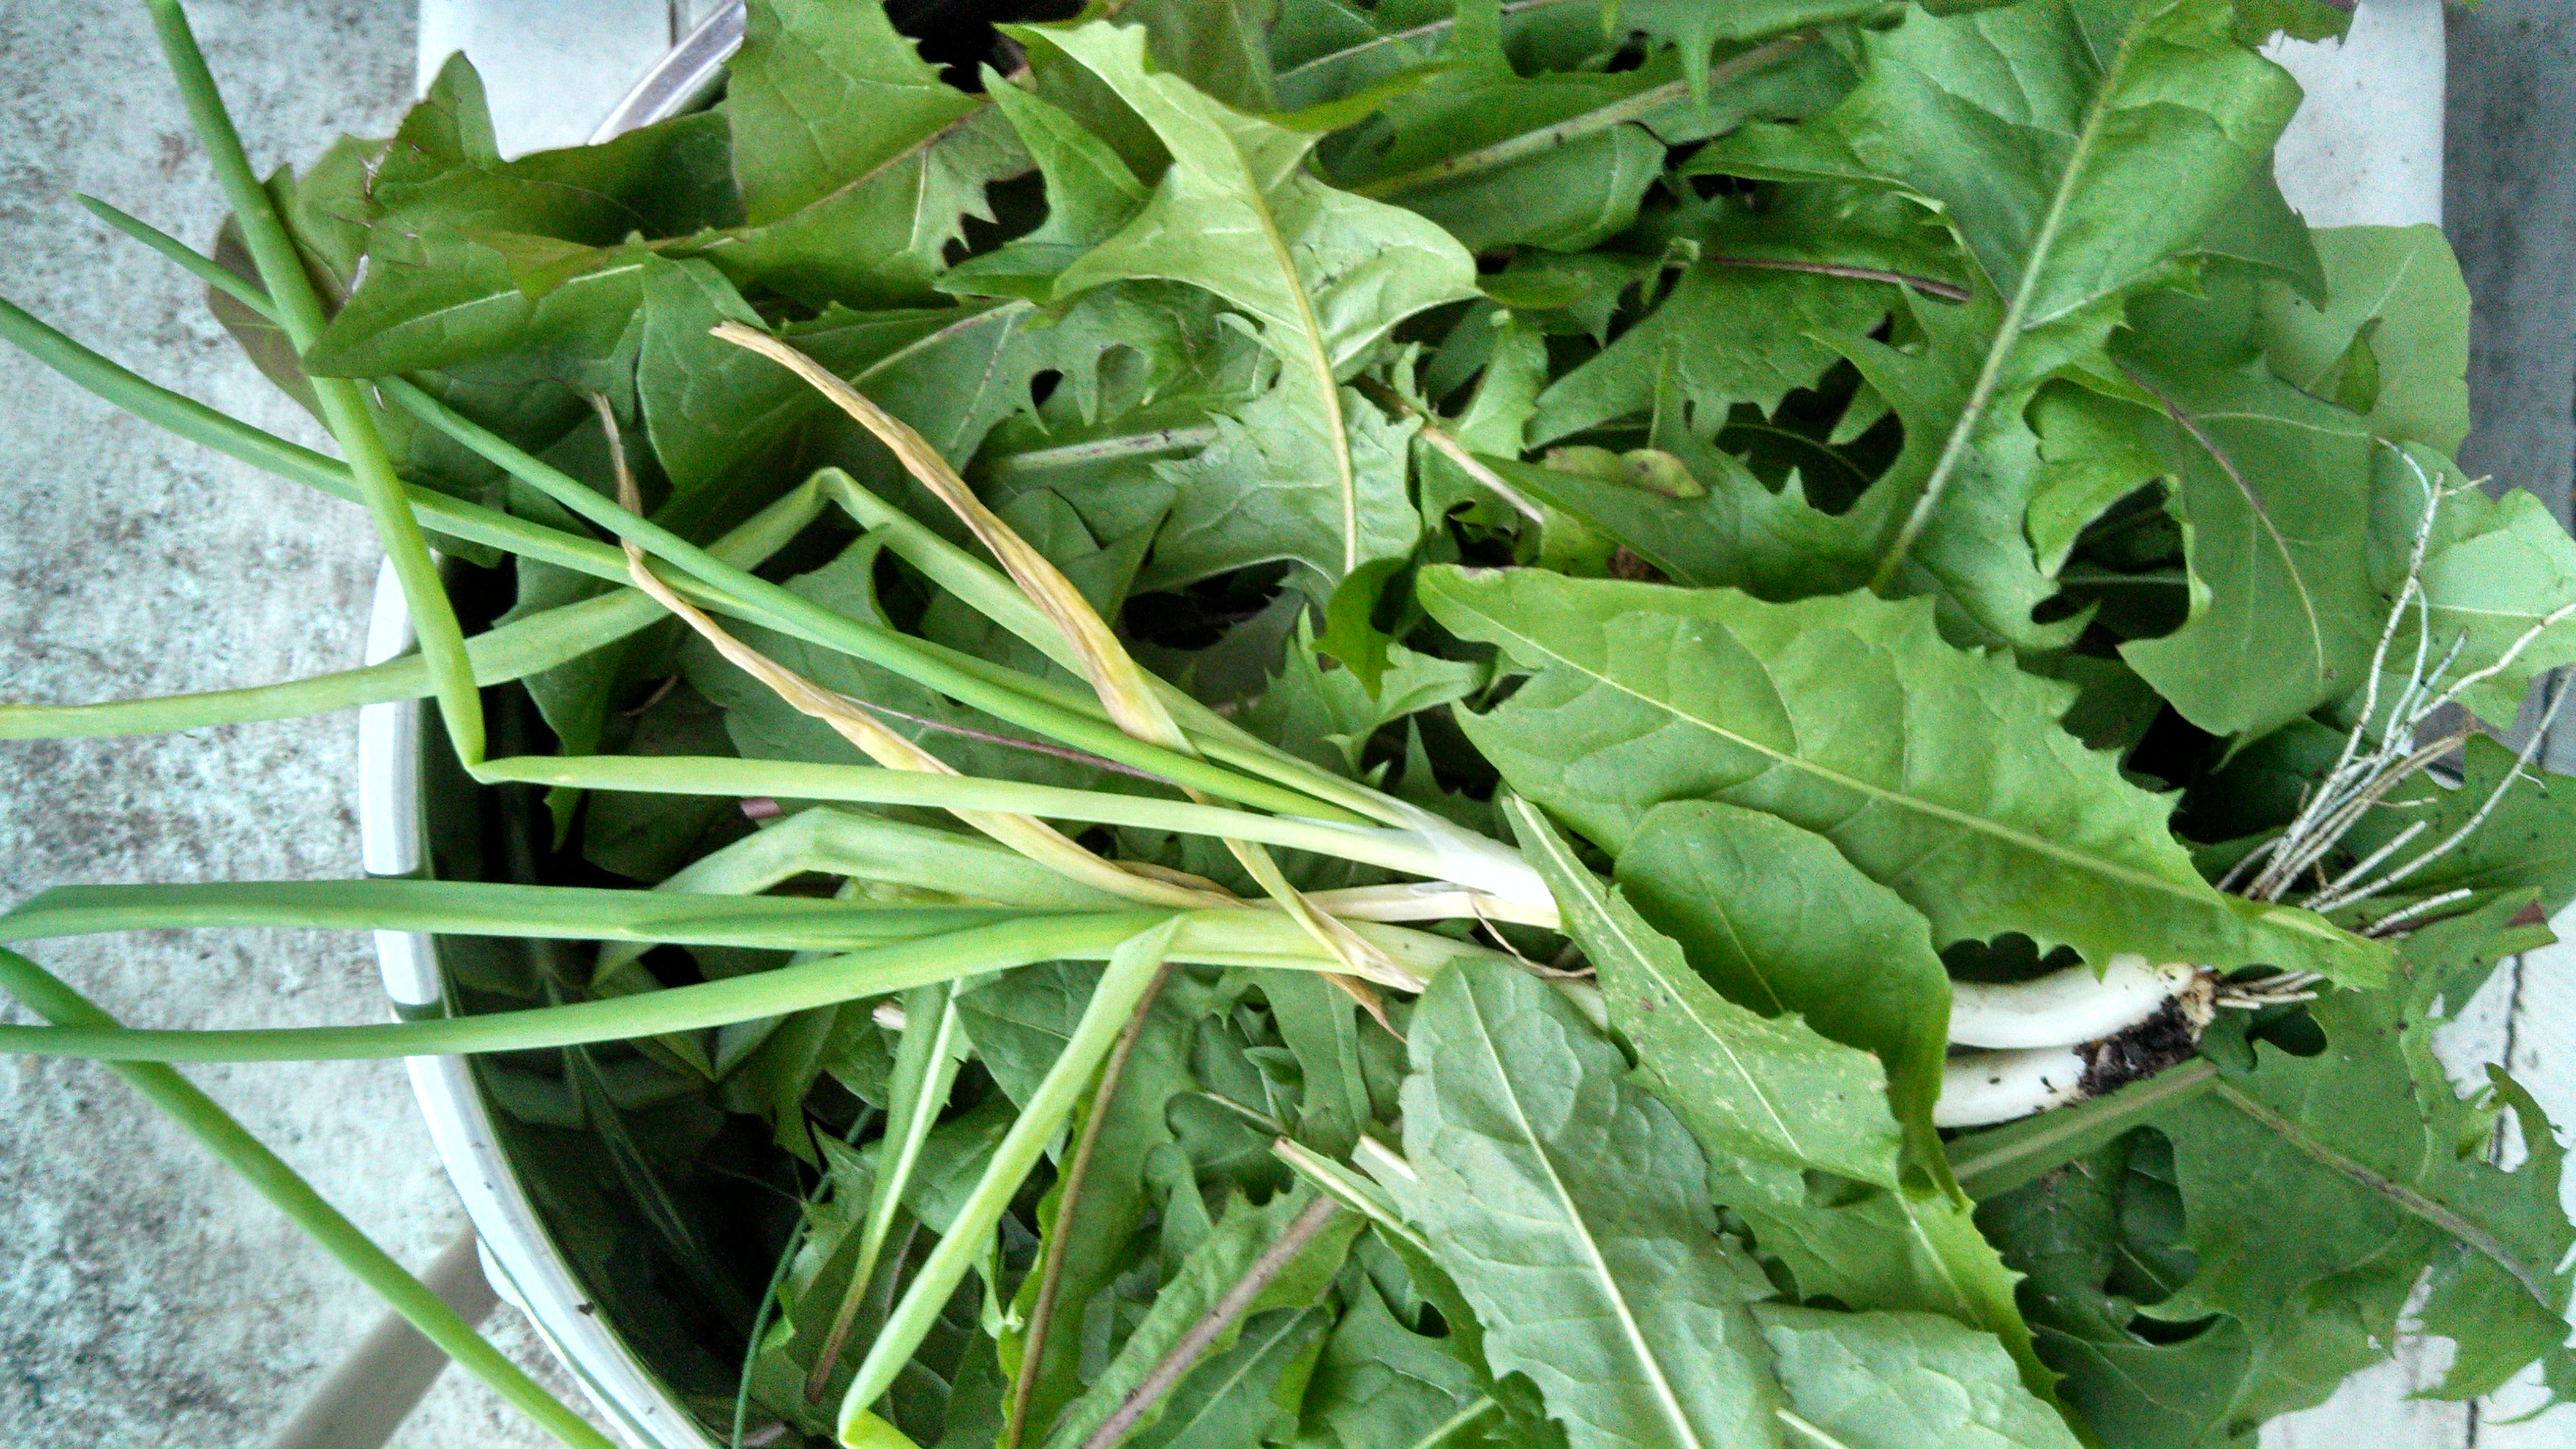 chard, dandelion greens and green onions from my winter garden